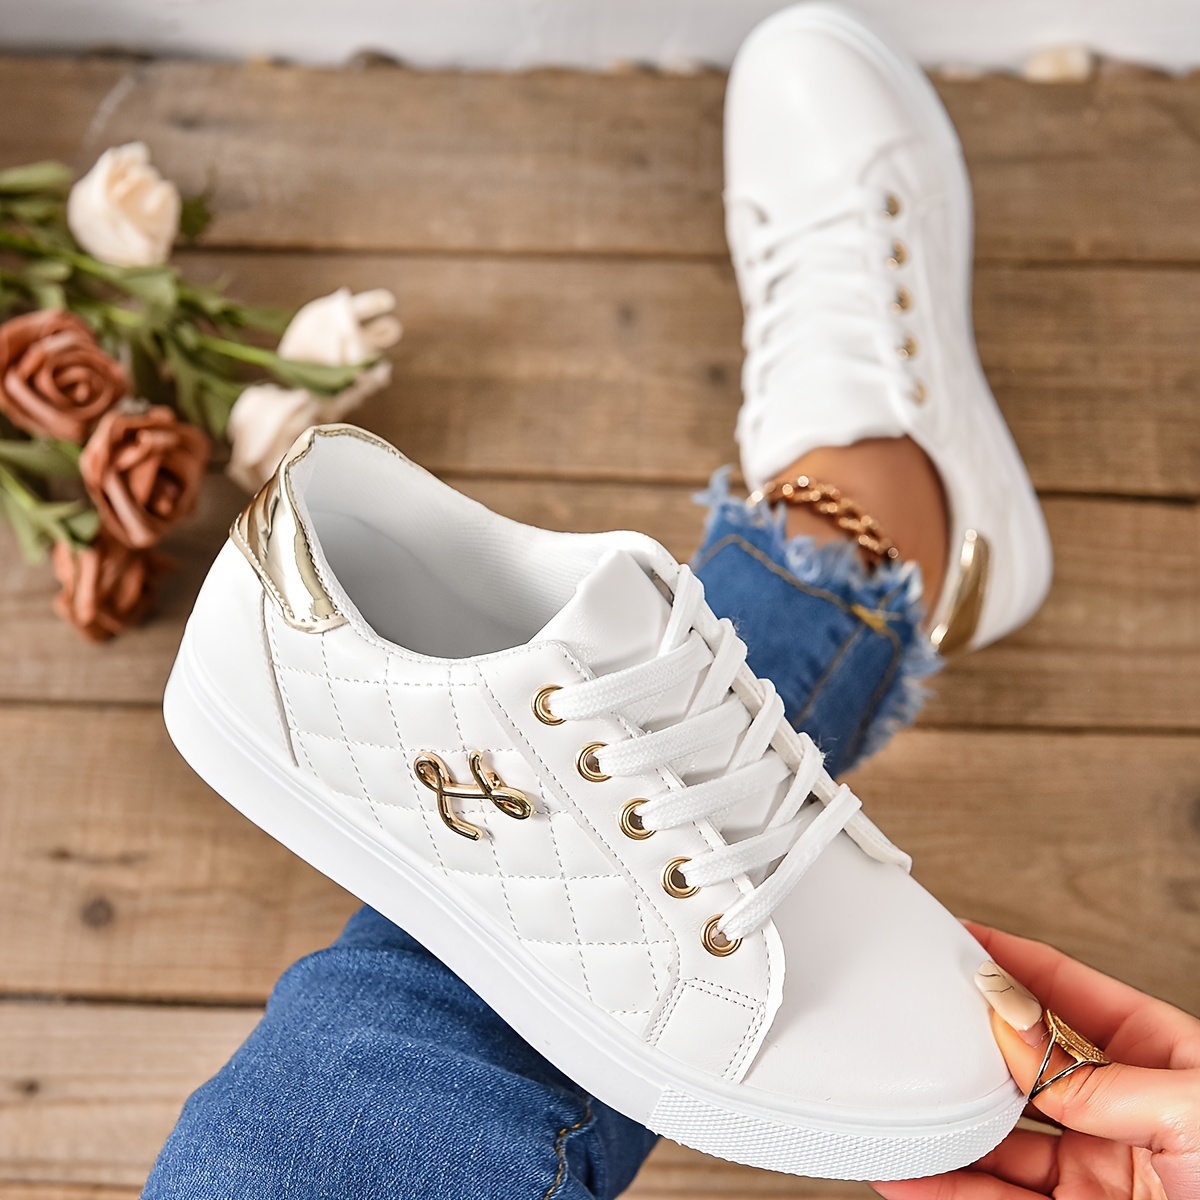 

Women's Quilted Skate Shoes, Metallic Buckle Decor Low Top Flat Sneakers, Casual White Walking Trainers